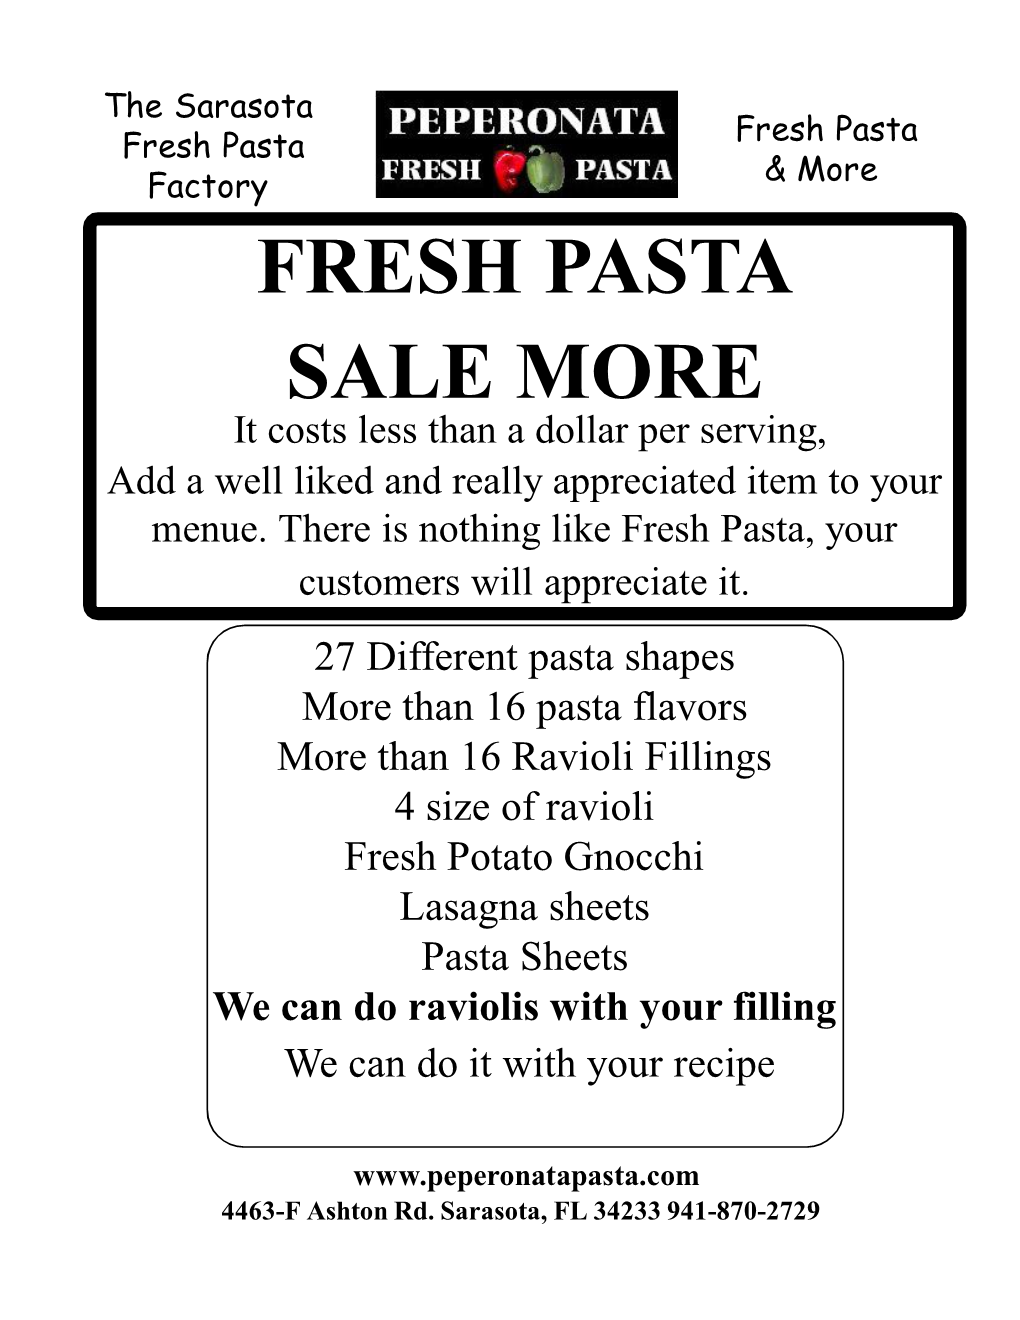 FRESH PASTA SALE MORE It Costs Less Than a Dollar Per Serving, Add a Well Liked and Really Appreciated Item to Your Menue